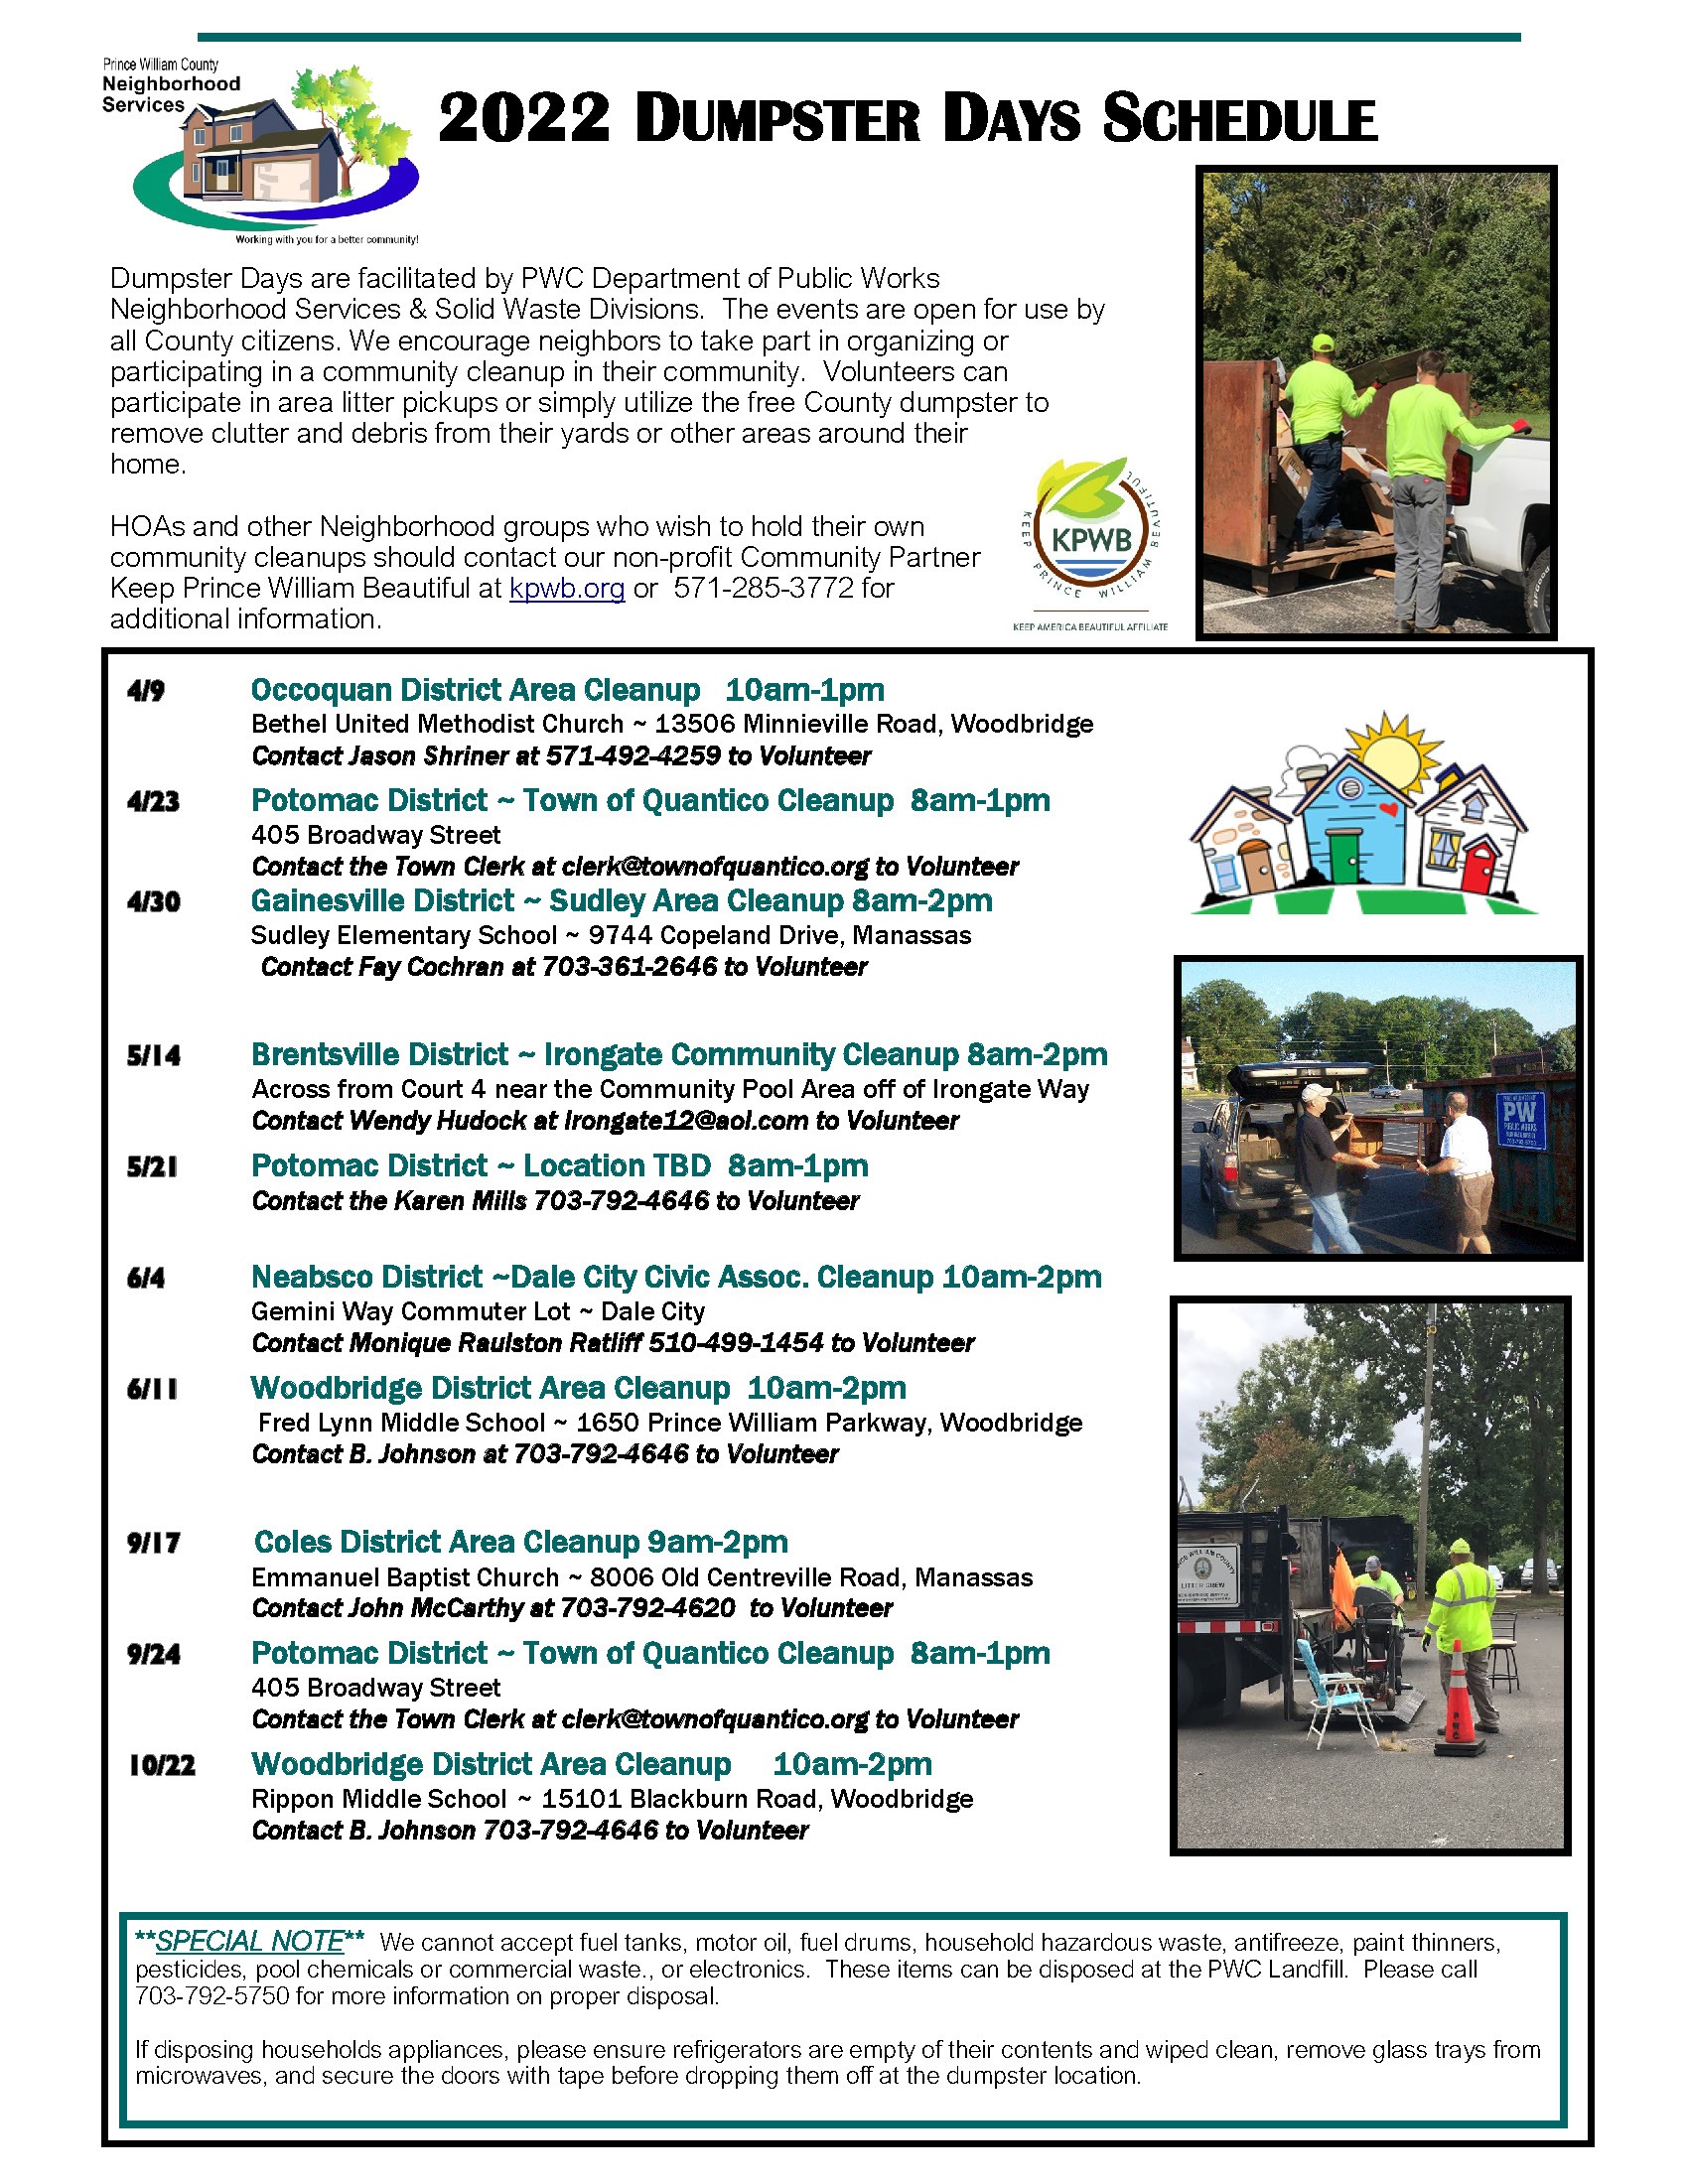 Dumpster Days Schedule 2022 FINAL - 2022 DUMPSTER DAYS: Gainesville District ~ Sudley Area Cleanup